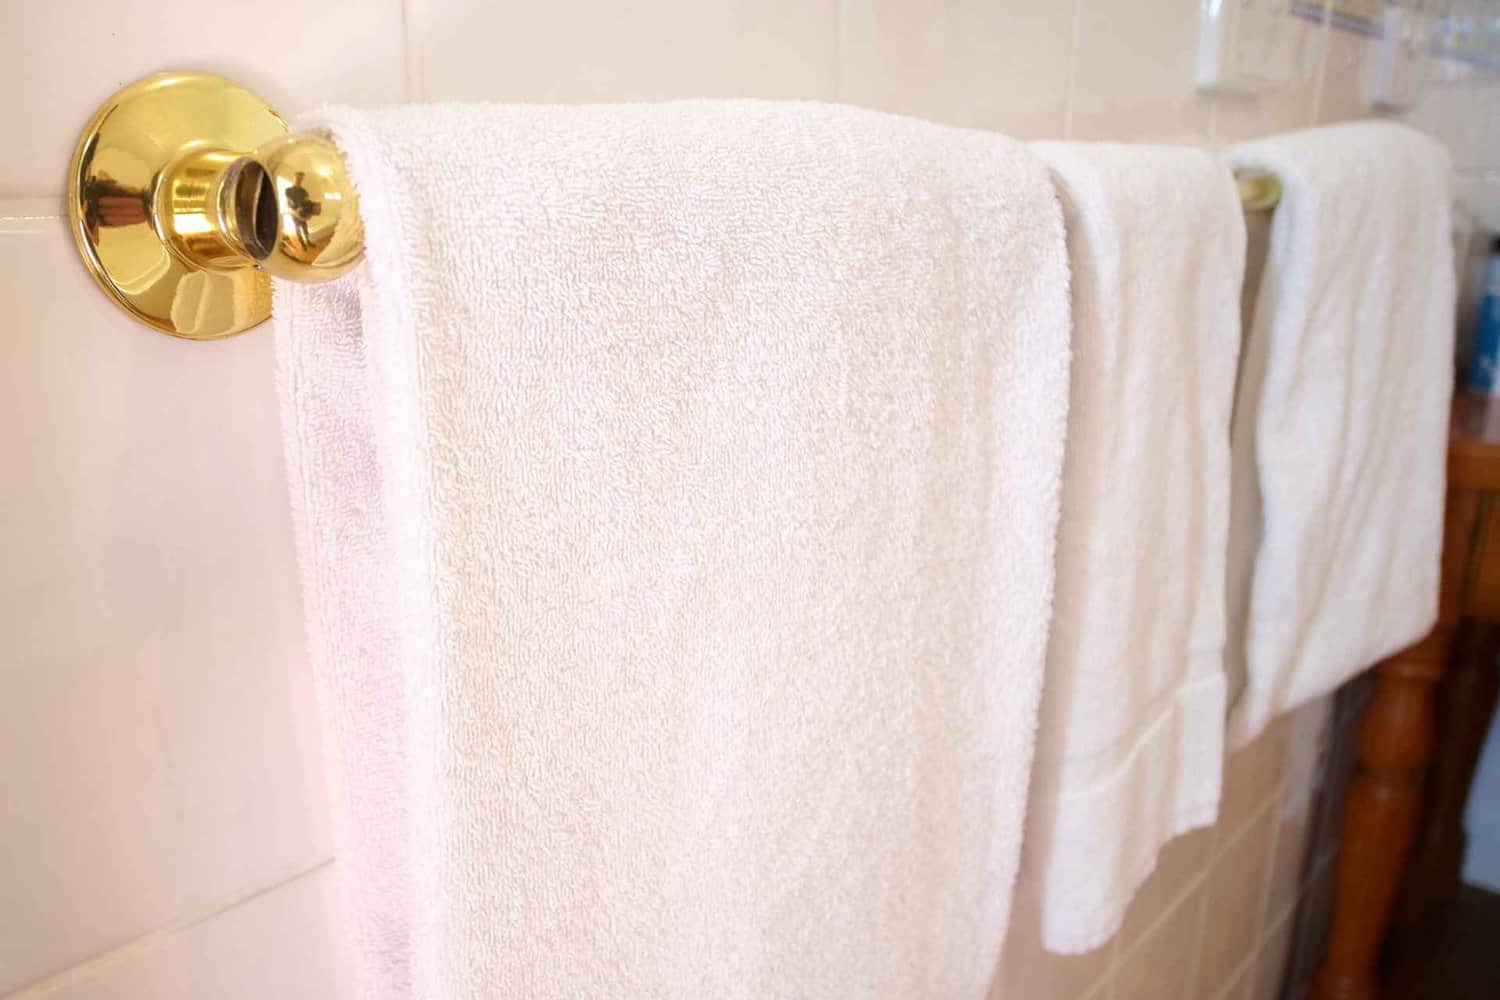 Close-up view of freshly laundered towels neatly hanging on a railing in a hotel bathroom, showcasing the attention to detail and cleanliness provided for guests during their stay